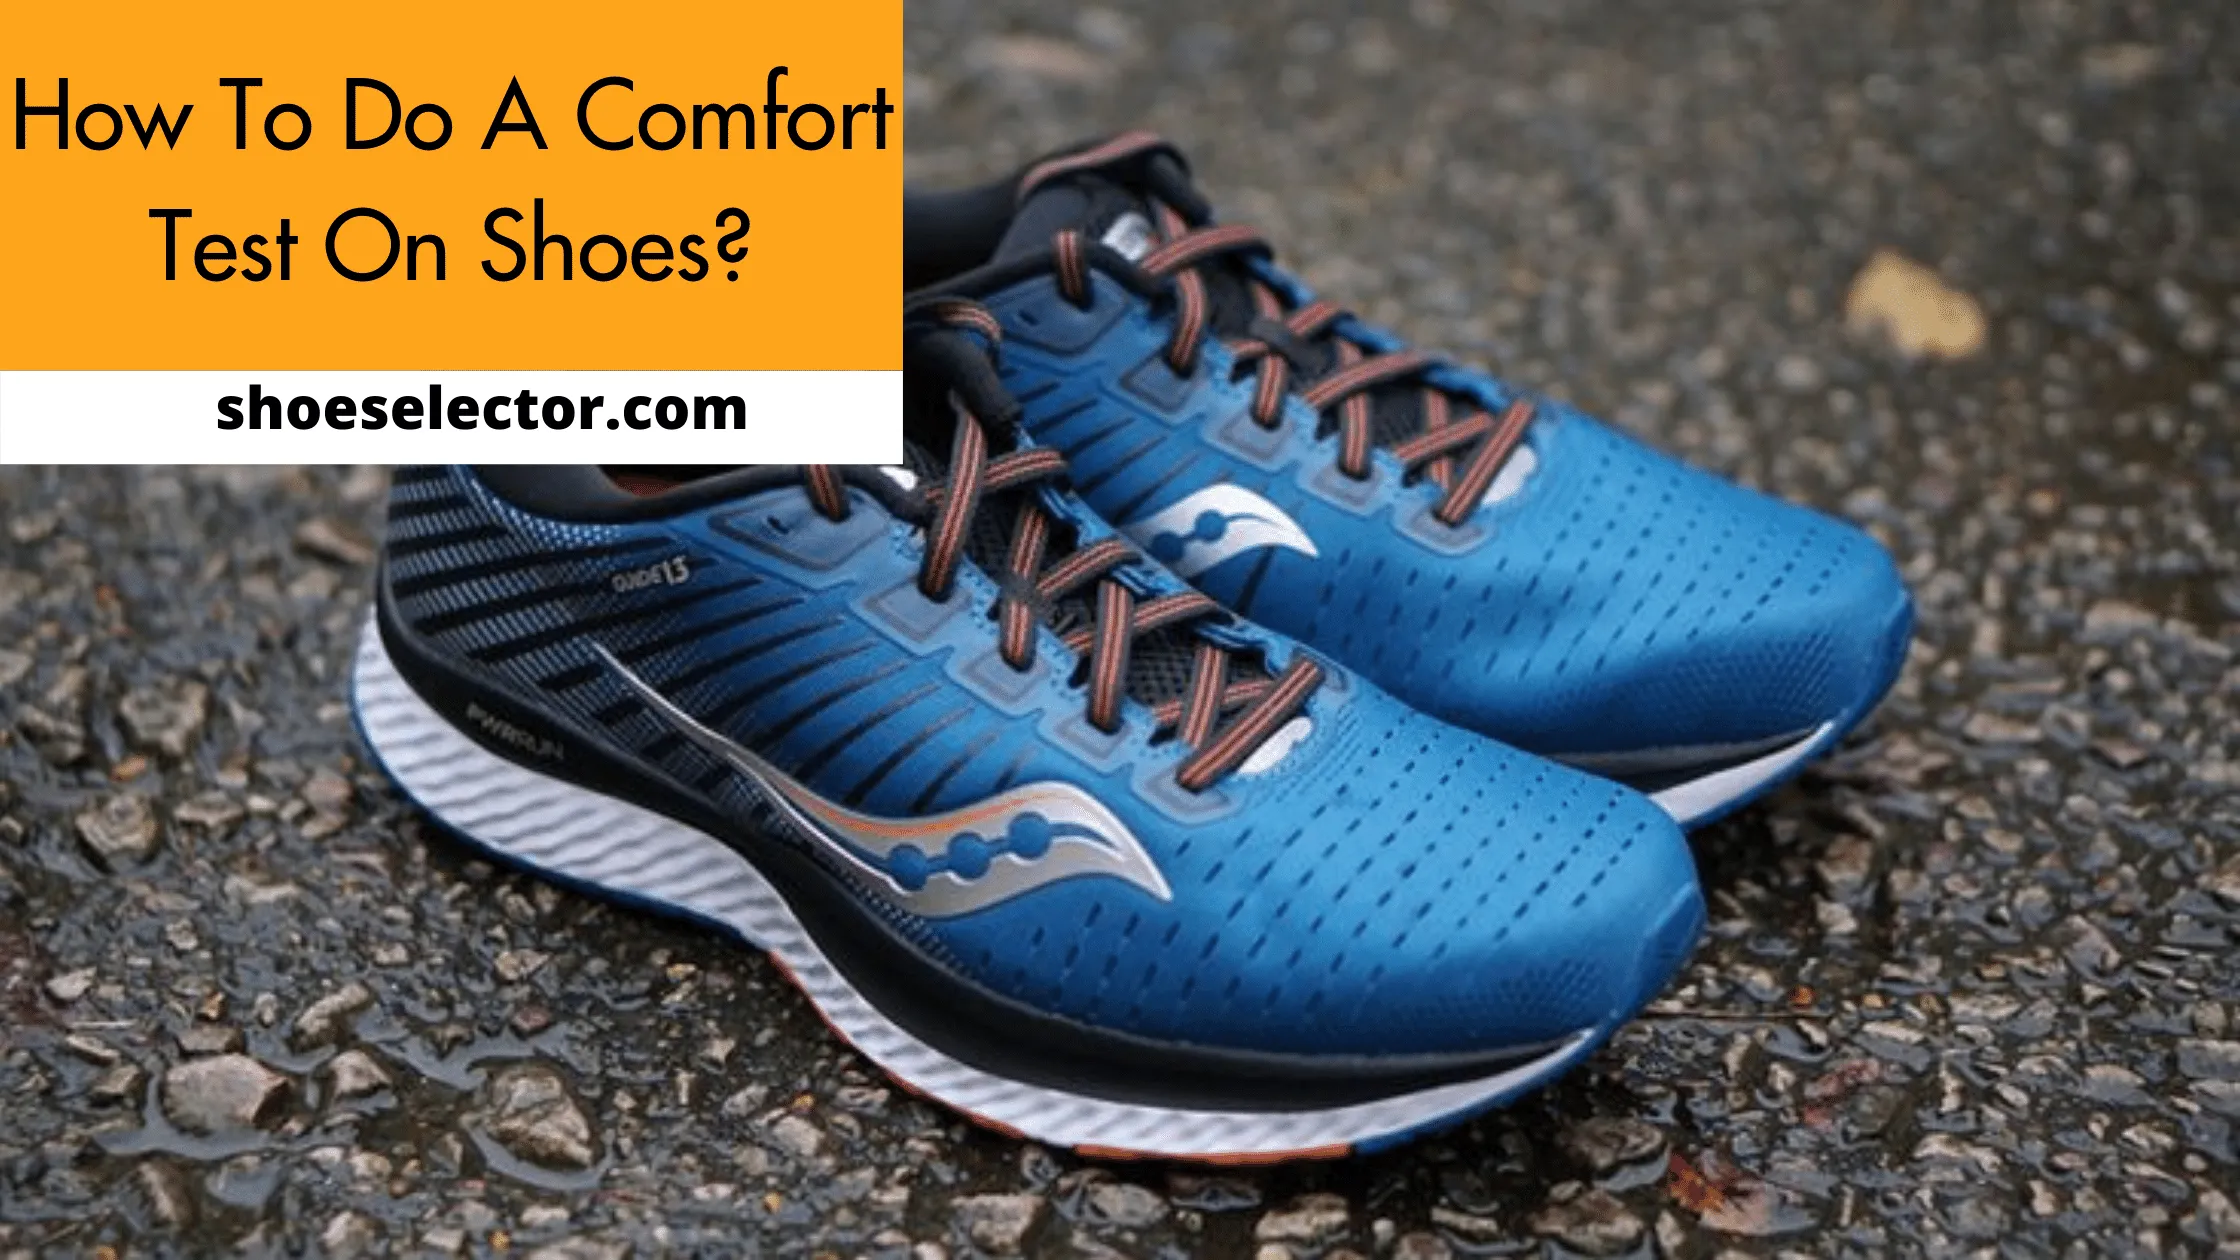 How To Do A Comfort Test On Shoes? - Solution Guide